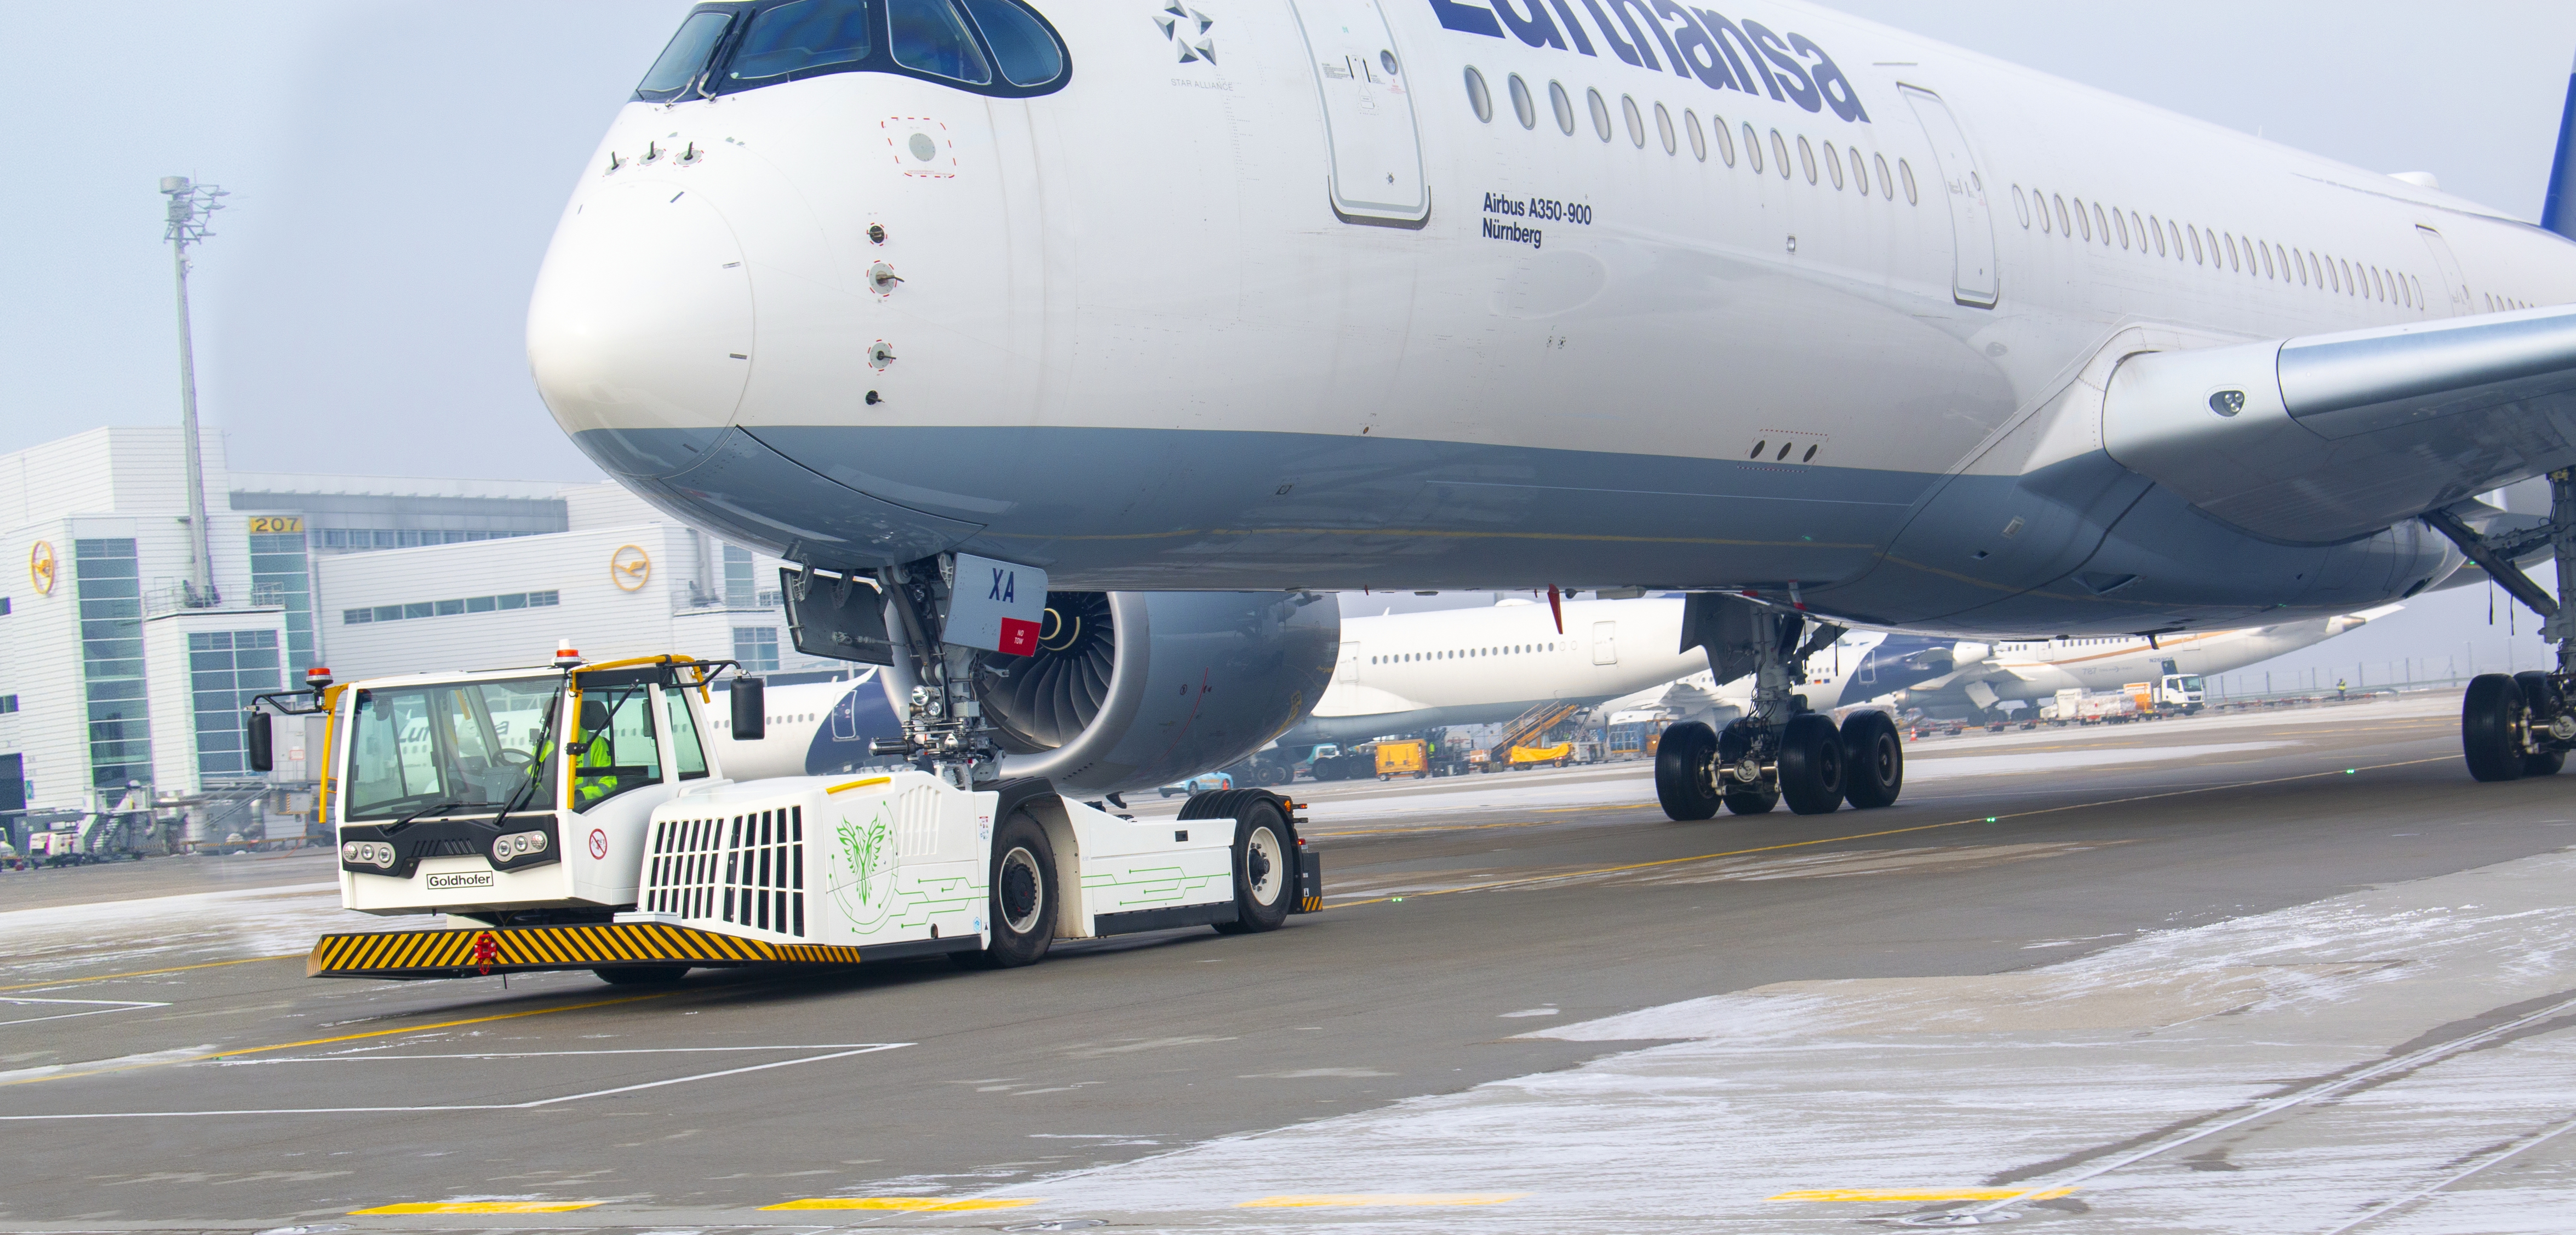 The electrified aircraft tractor pulls an Airbus A350-900